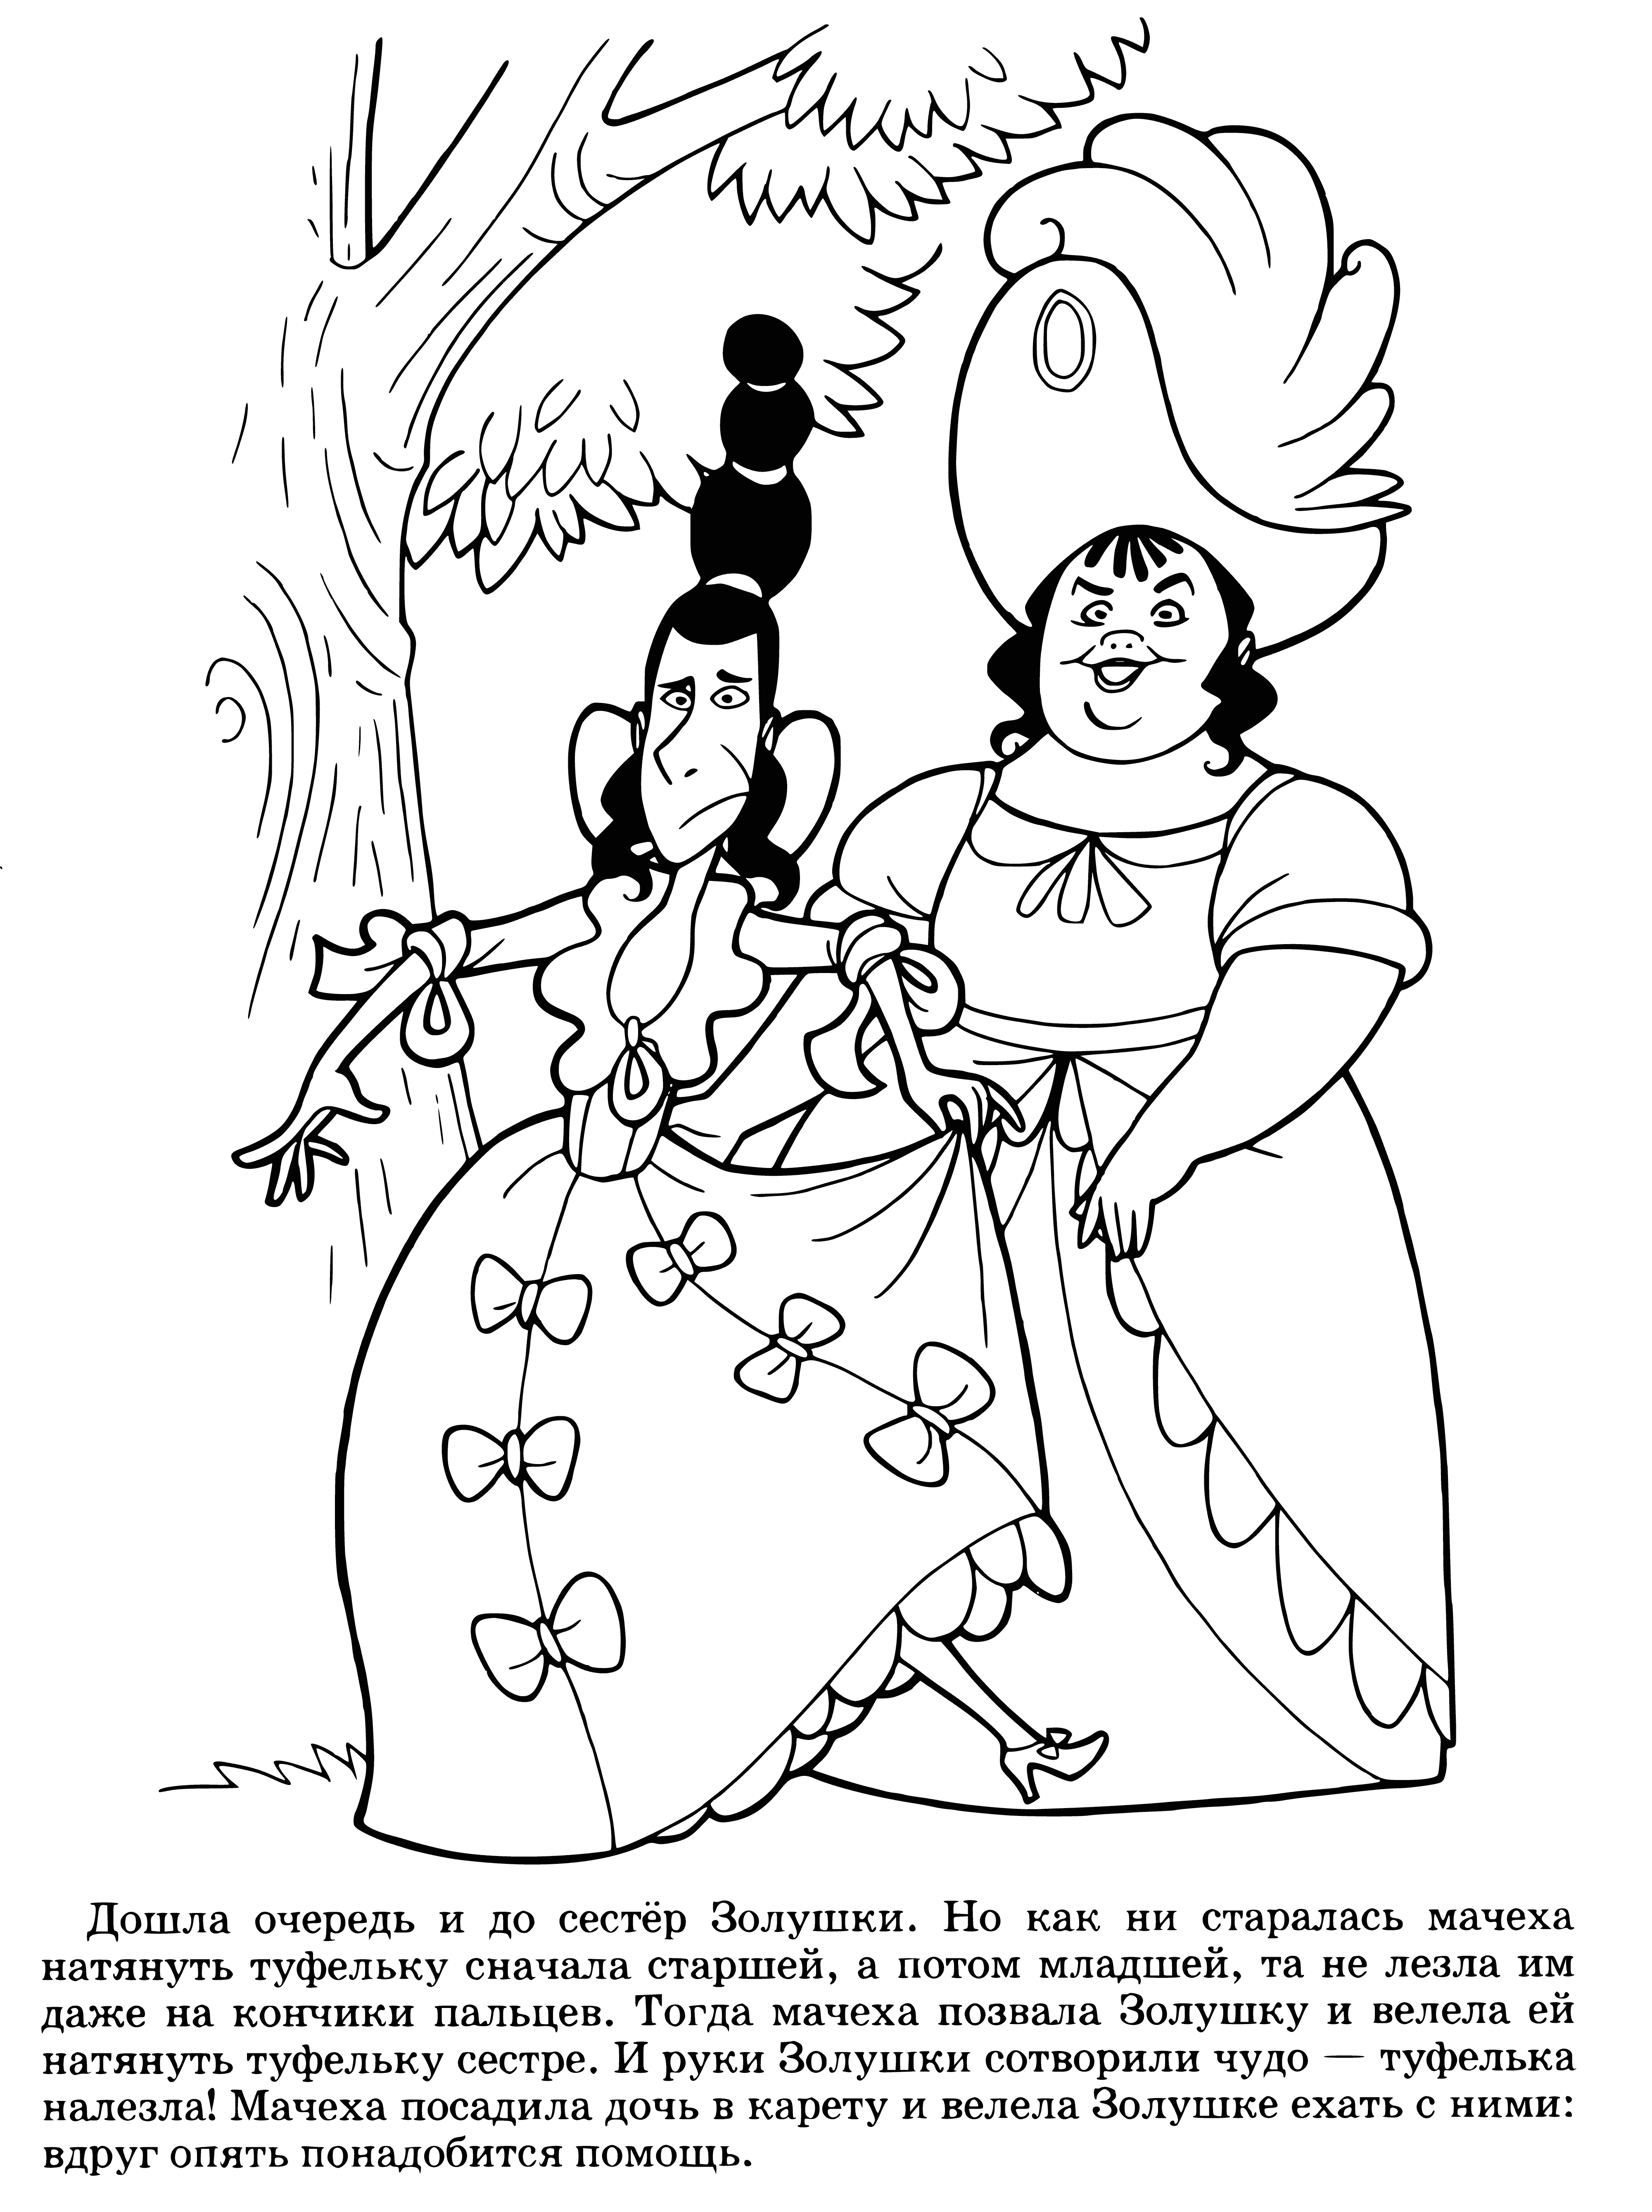 coloring page: Two sad sisters gaze at a castle: one stands, the other sits on ground, beside a pumpkin. (78 characters)